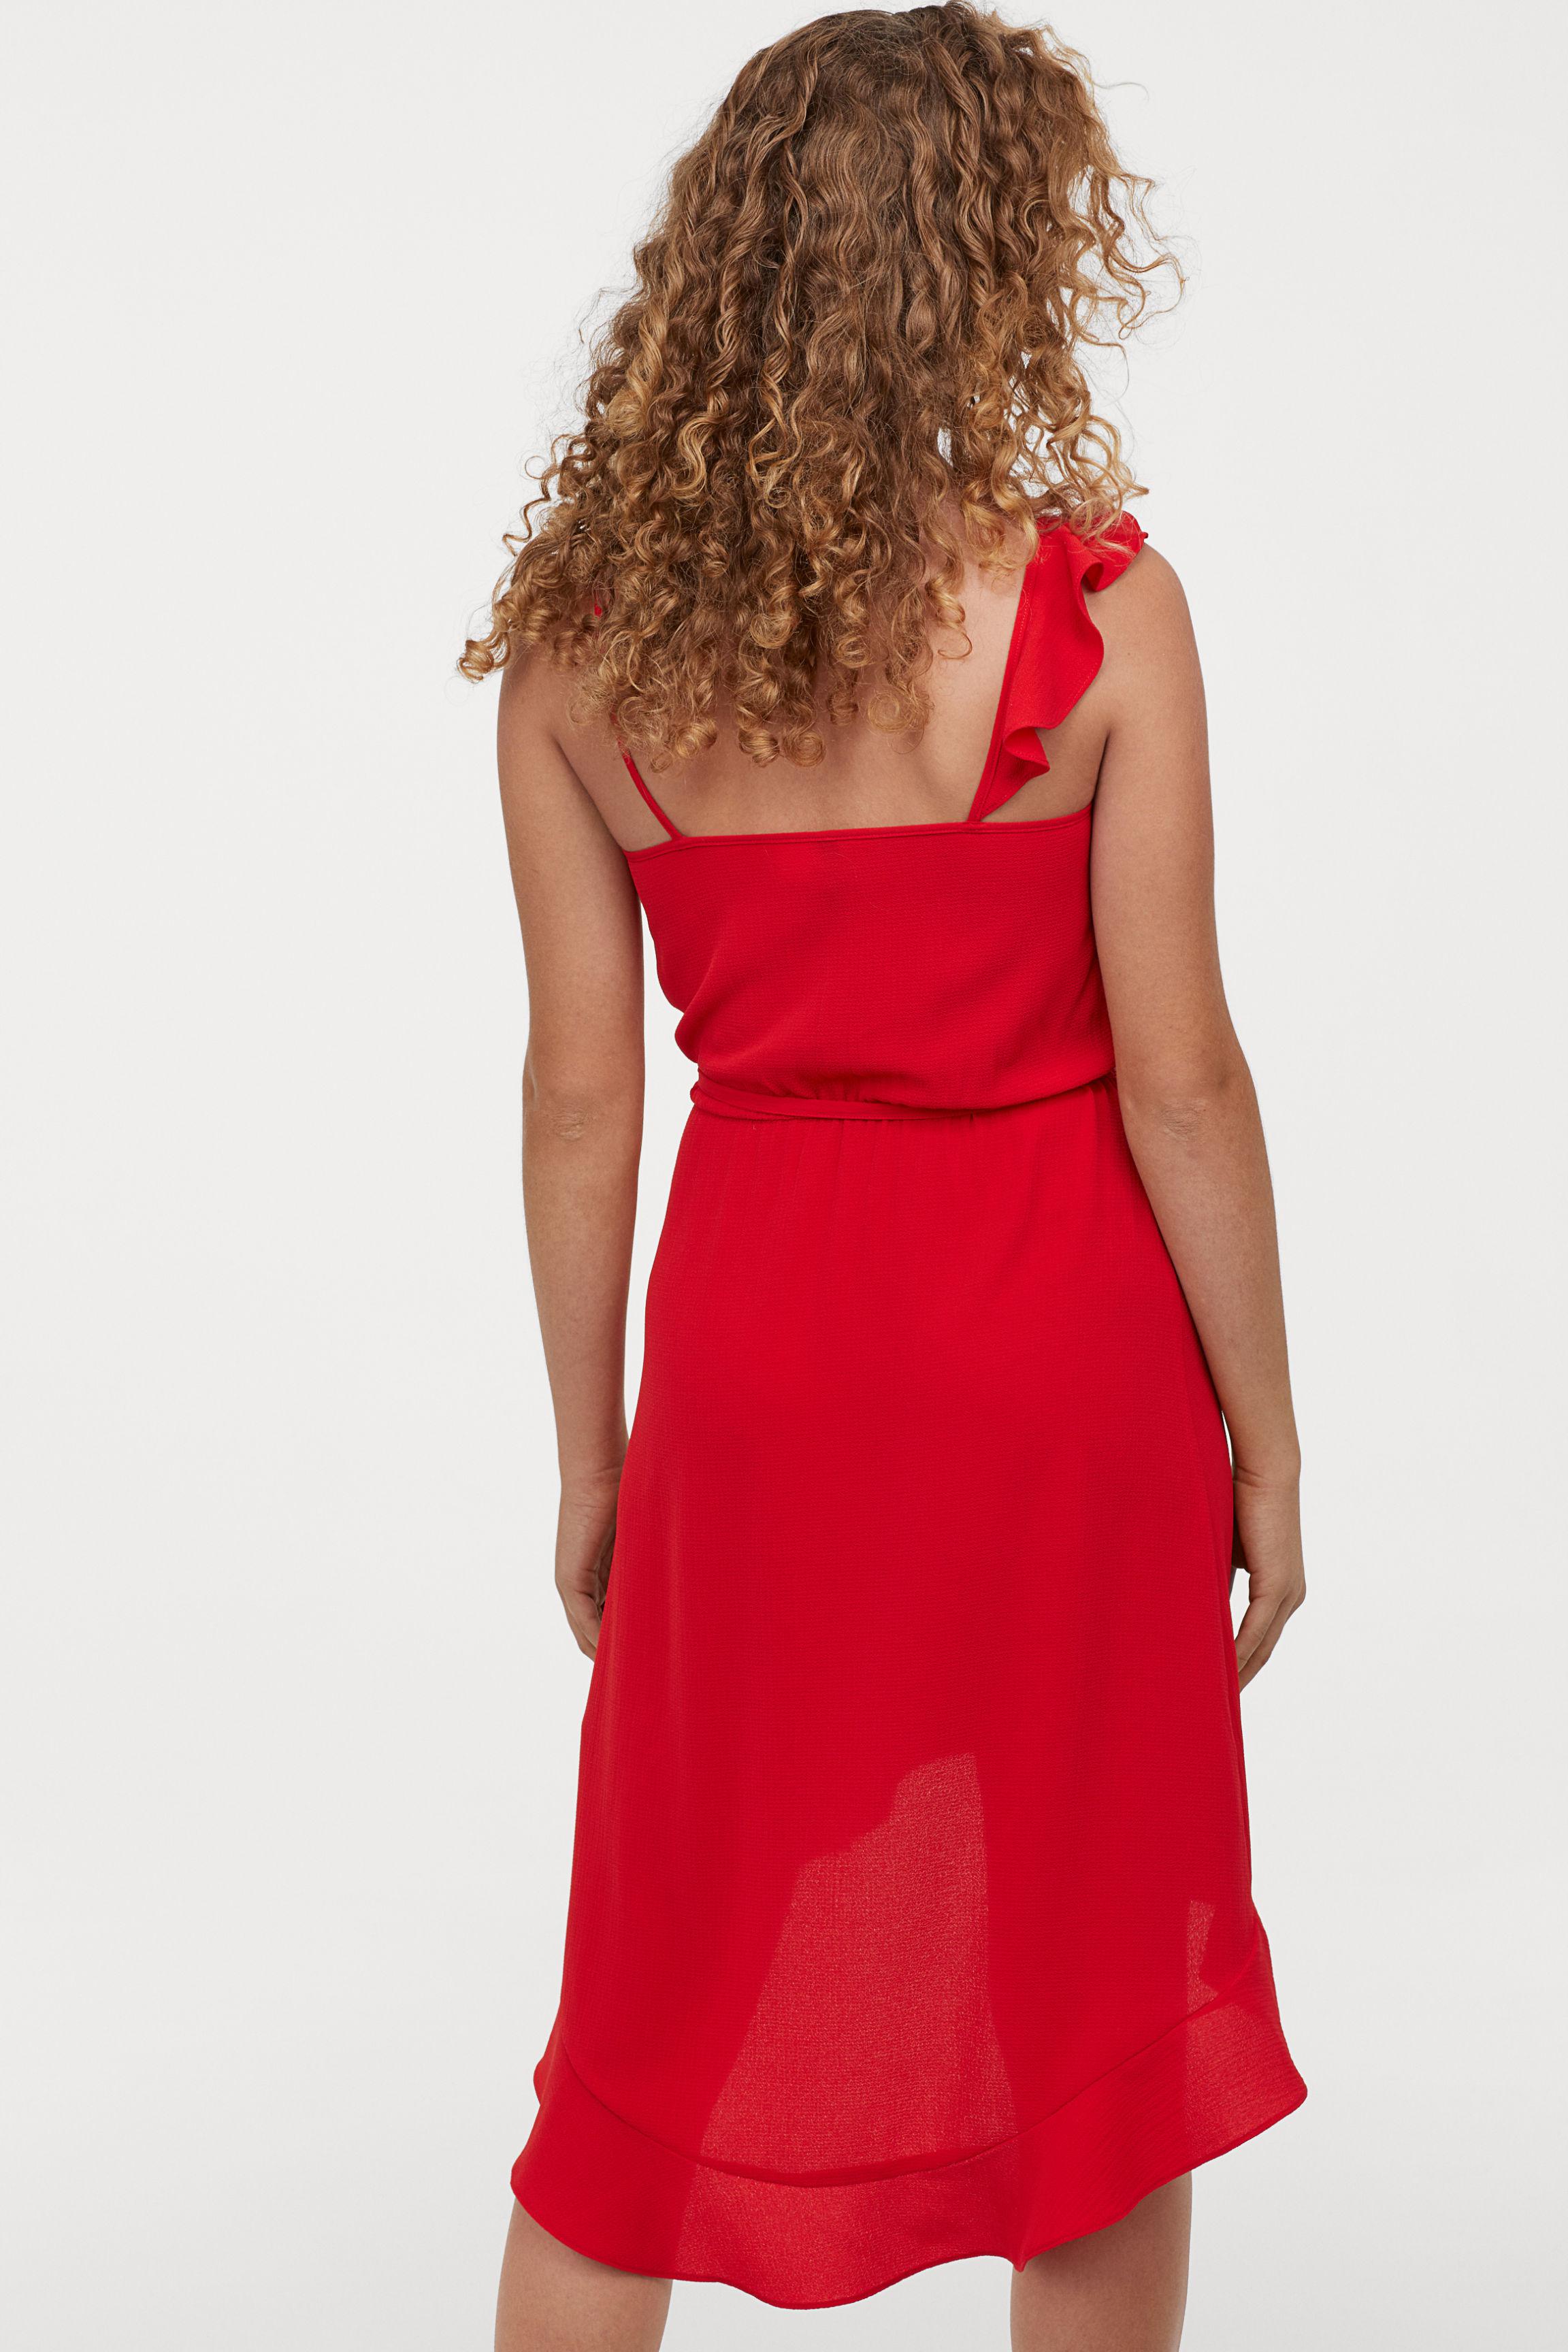 Lyst H&M Flounced Wrap Dress in Red